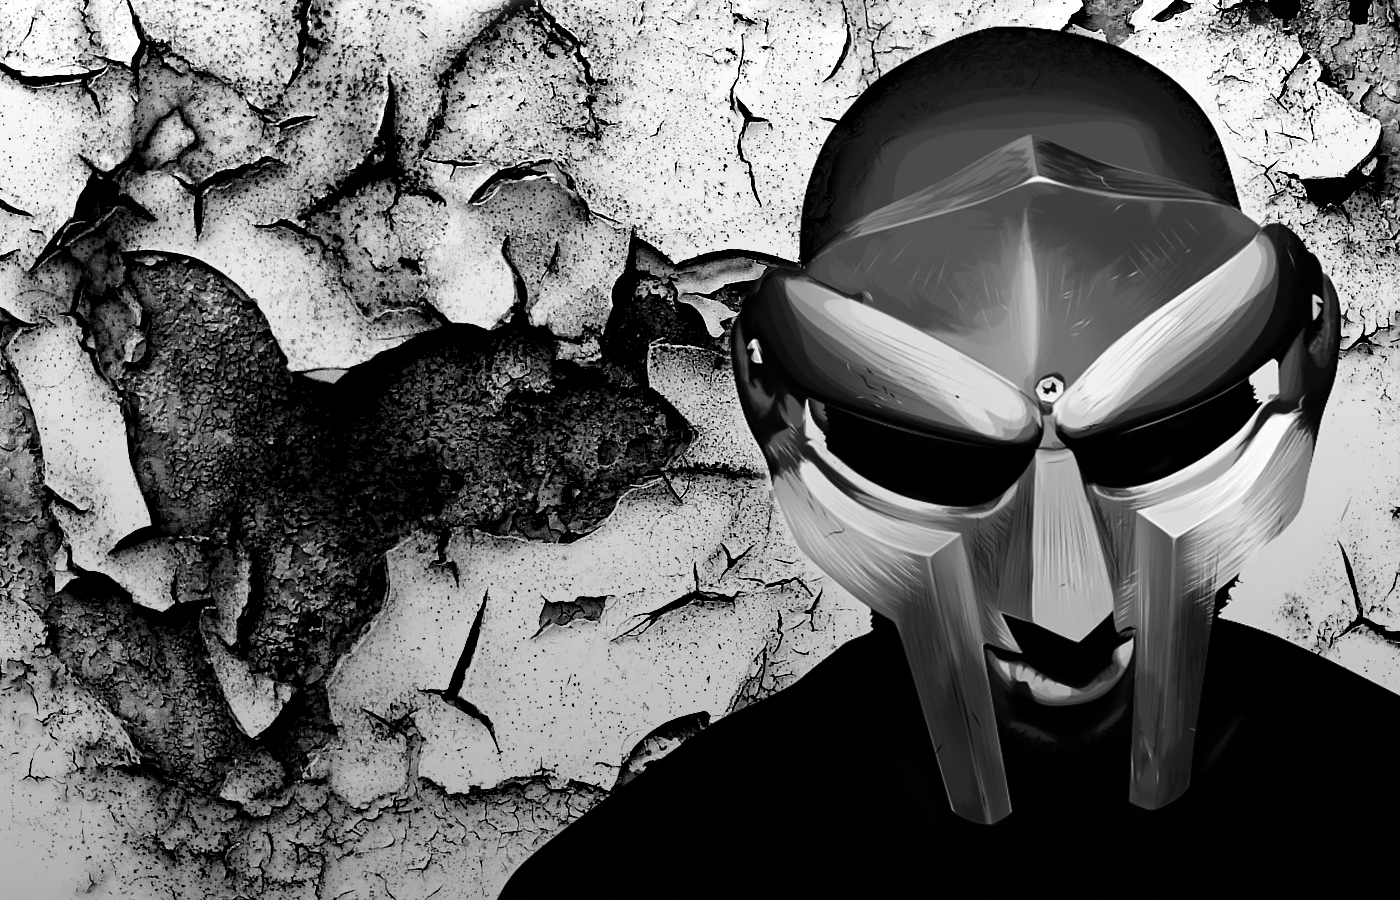 MF Doom Made for My Main Monitor at Work wallpaper in 2560x1440 resolution